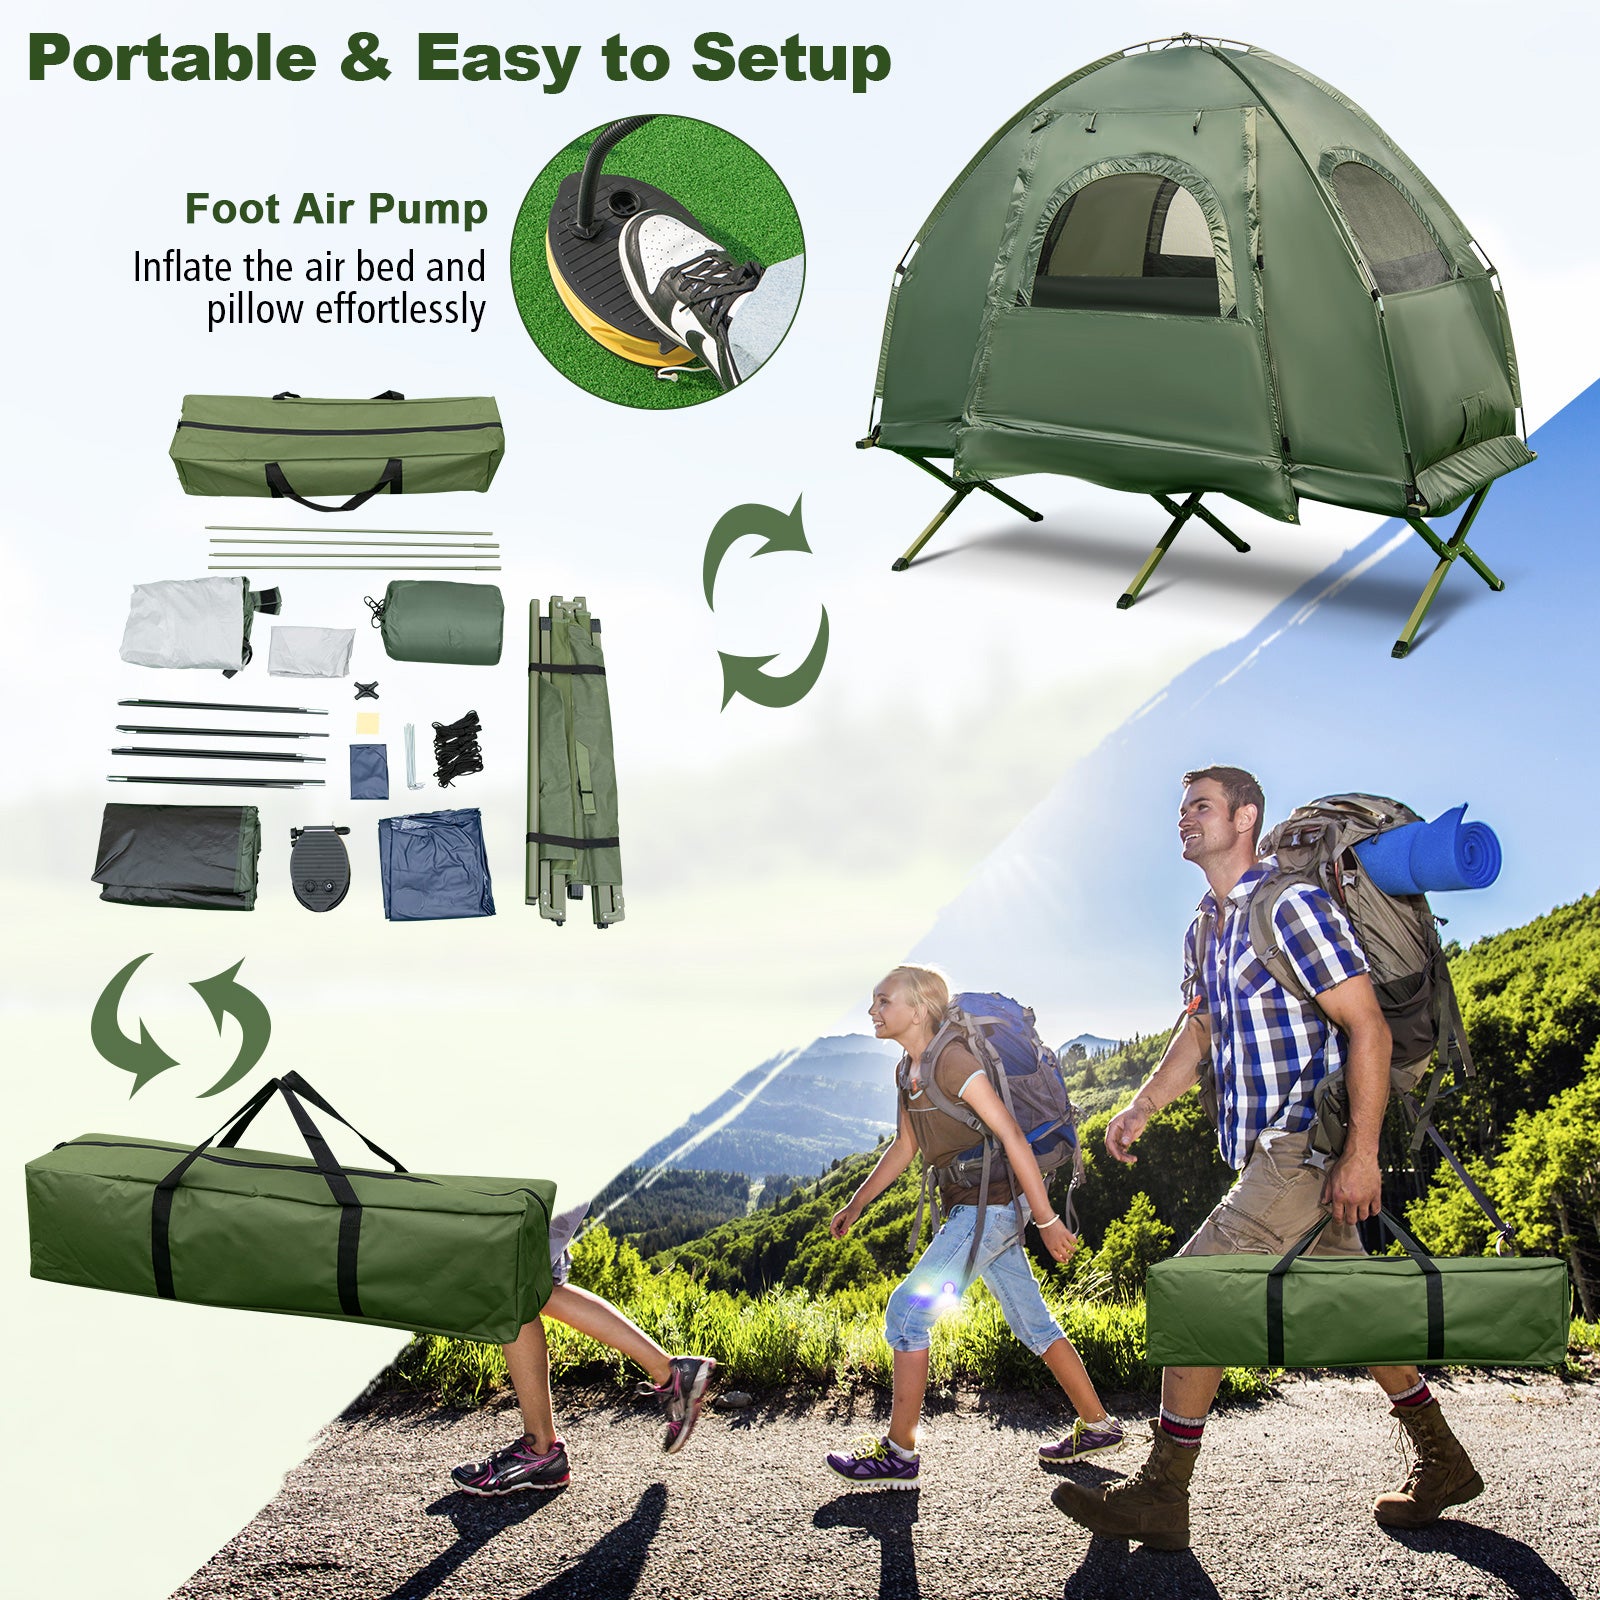 Easy Assembly and Ventilation: With a concise manual provided, the assembly process is straightforward, allowing you to quickly set up the tent cot and immerse yourself in nature. Four meshed windows promote airflow, keeping the interior cool and comfortable. When it's time to pack up, the tent cot can be easily folded in seconds and stored in the included carry bag, making transportation and storage a breeze.